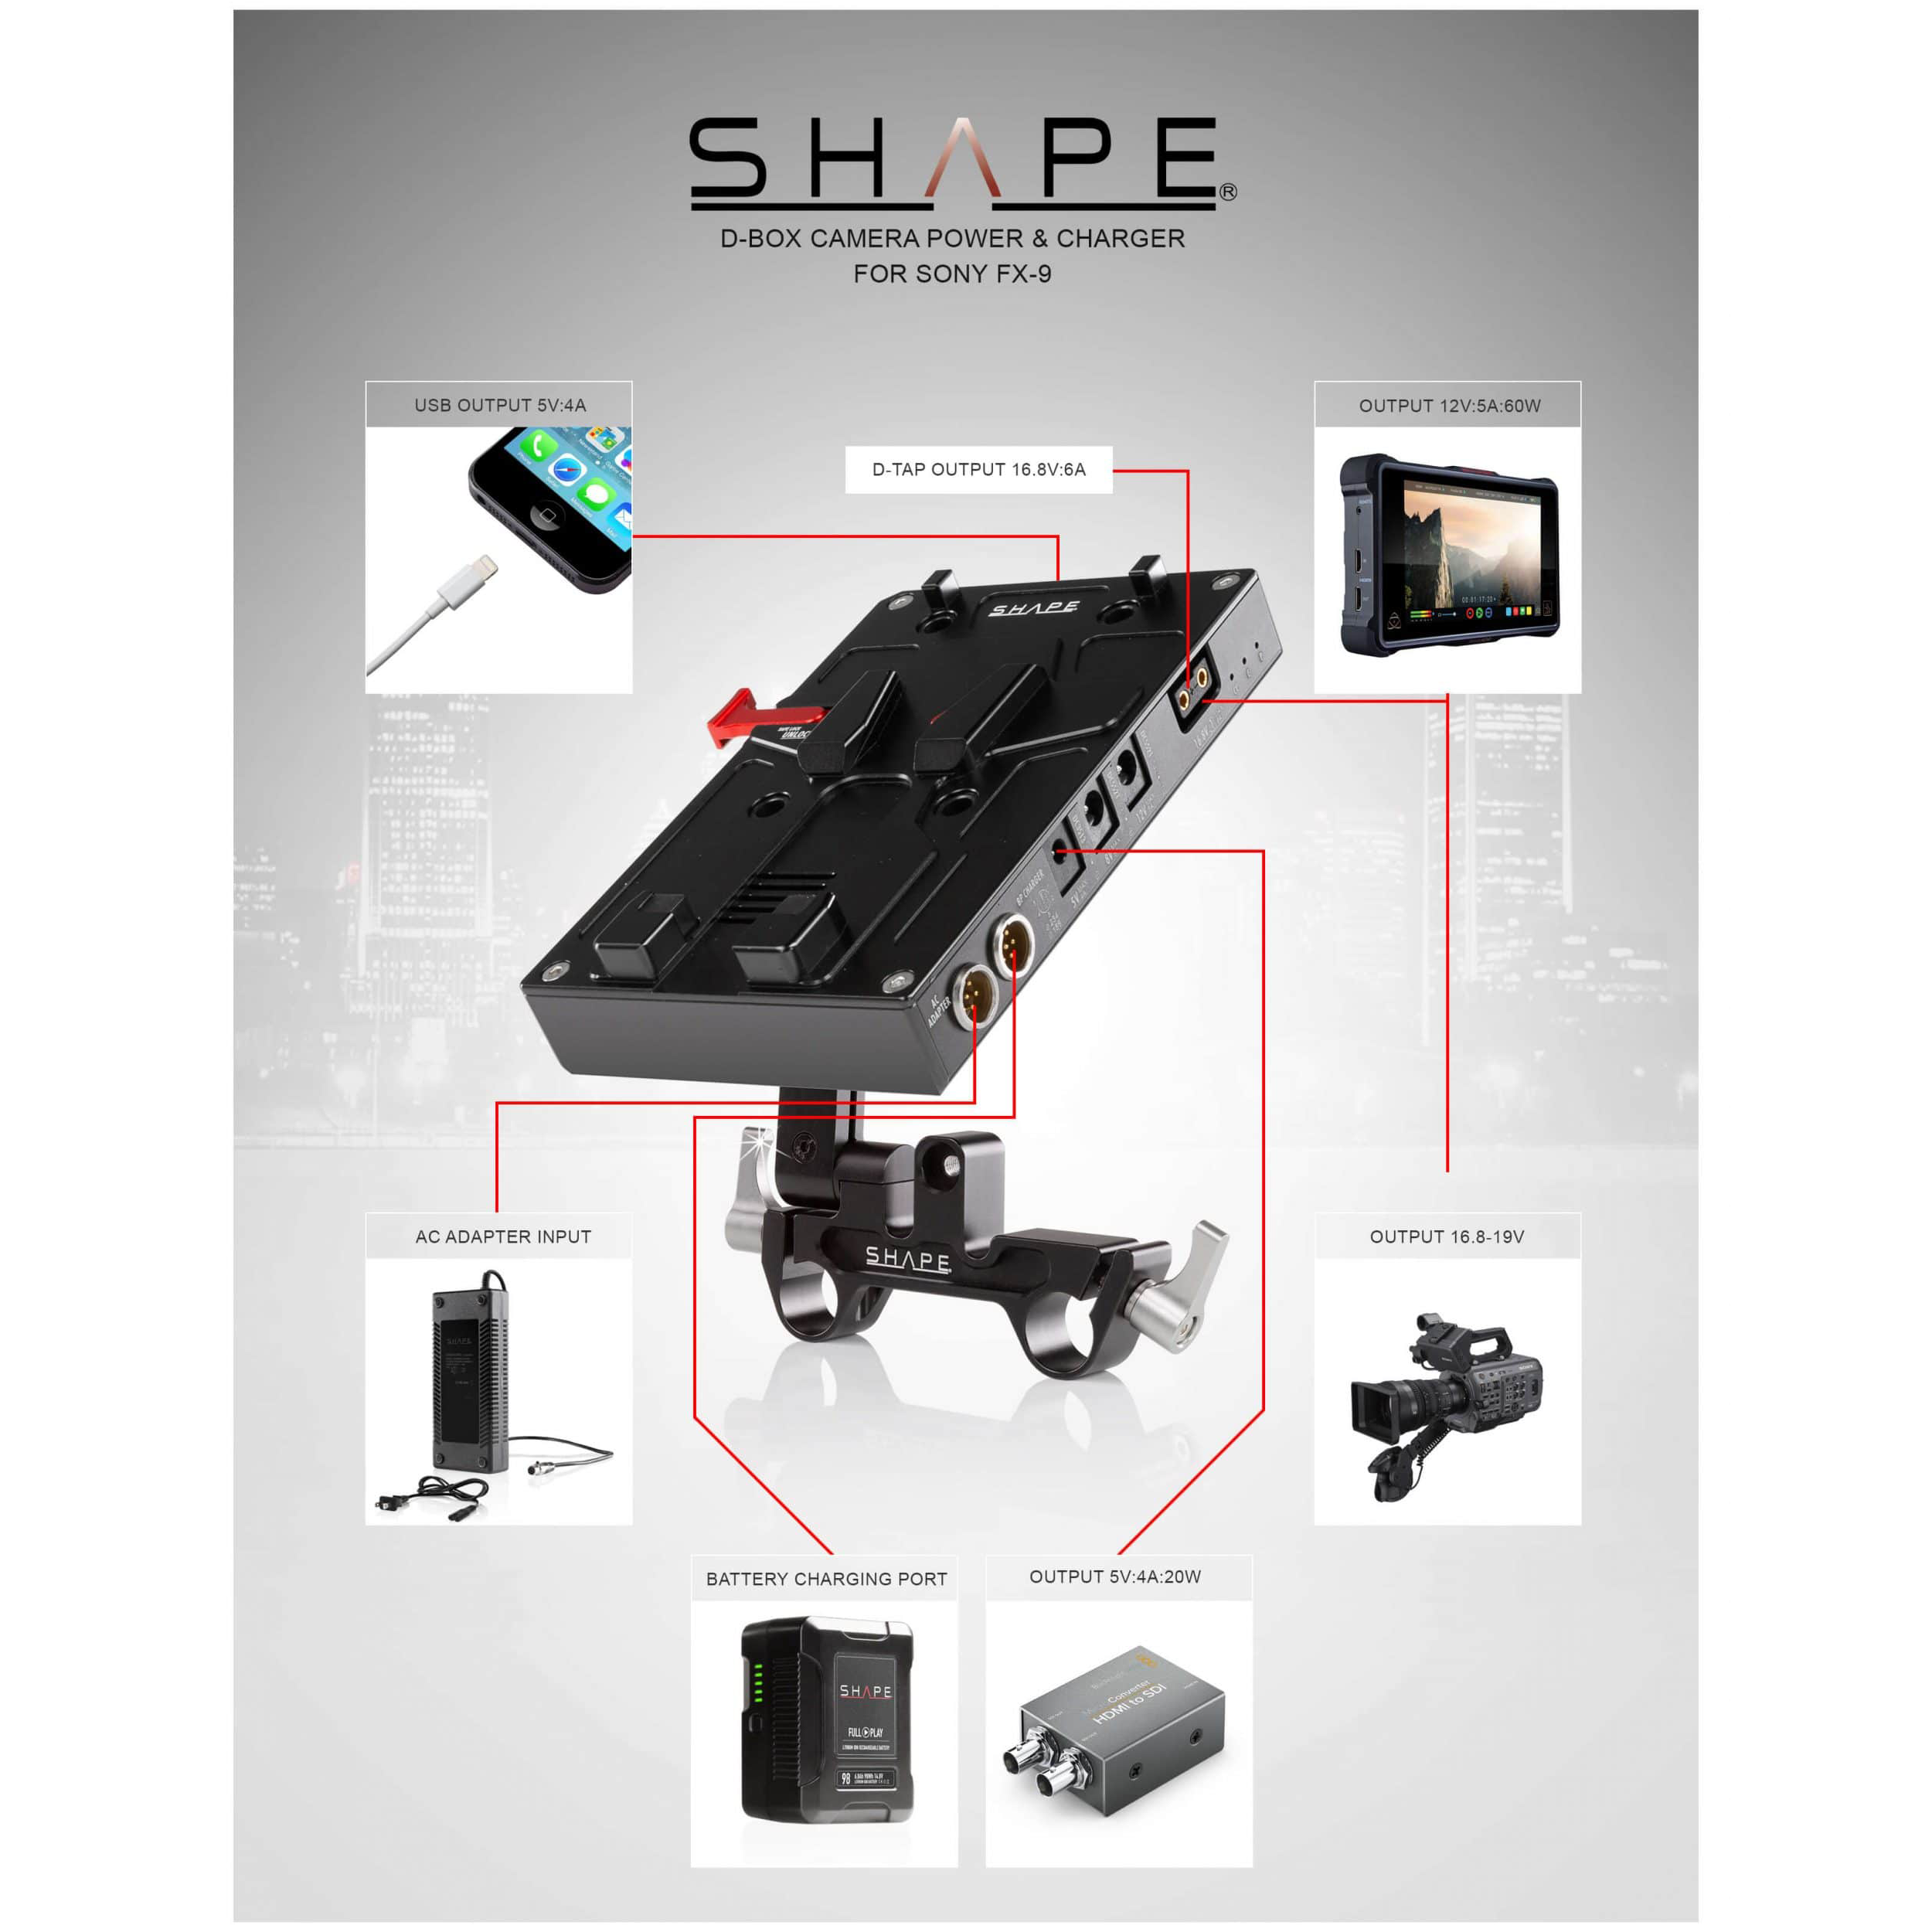 SHAPE J-Box Camera Power & Charger for Sony PXW-FX9 (V-Mount)